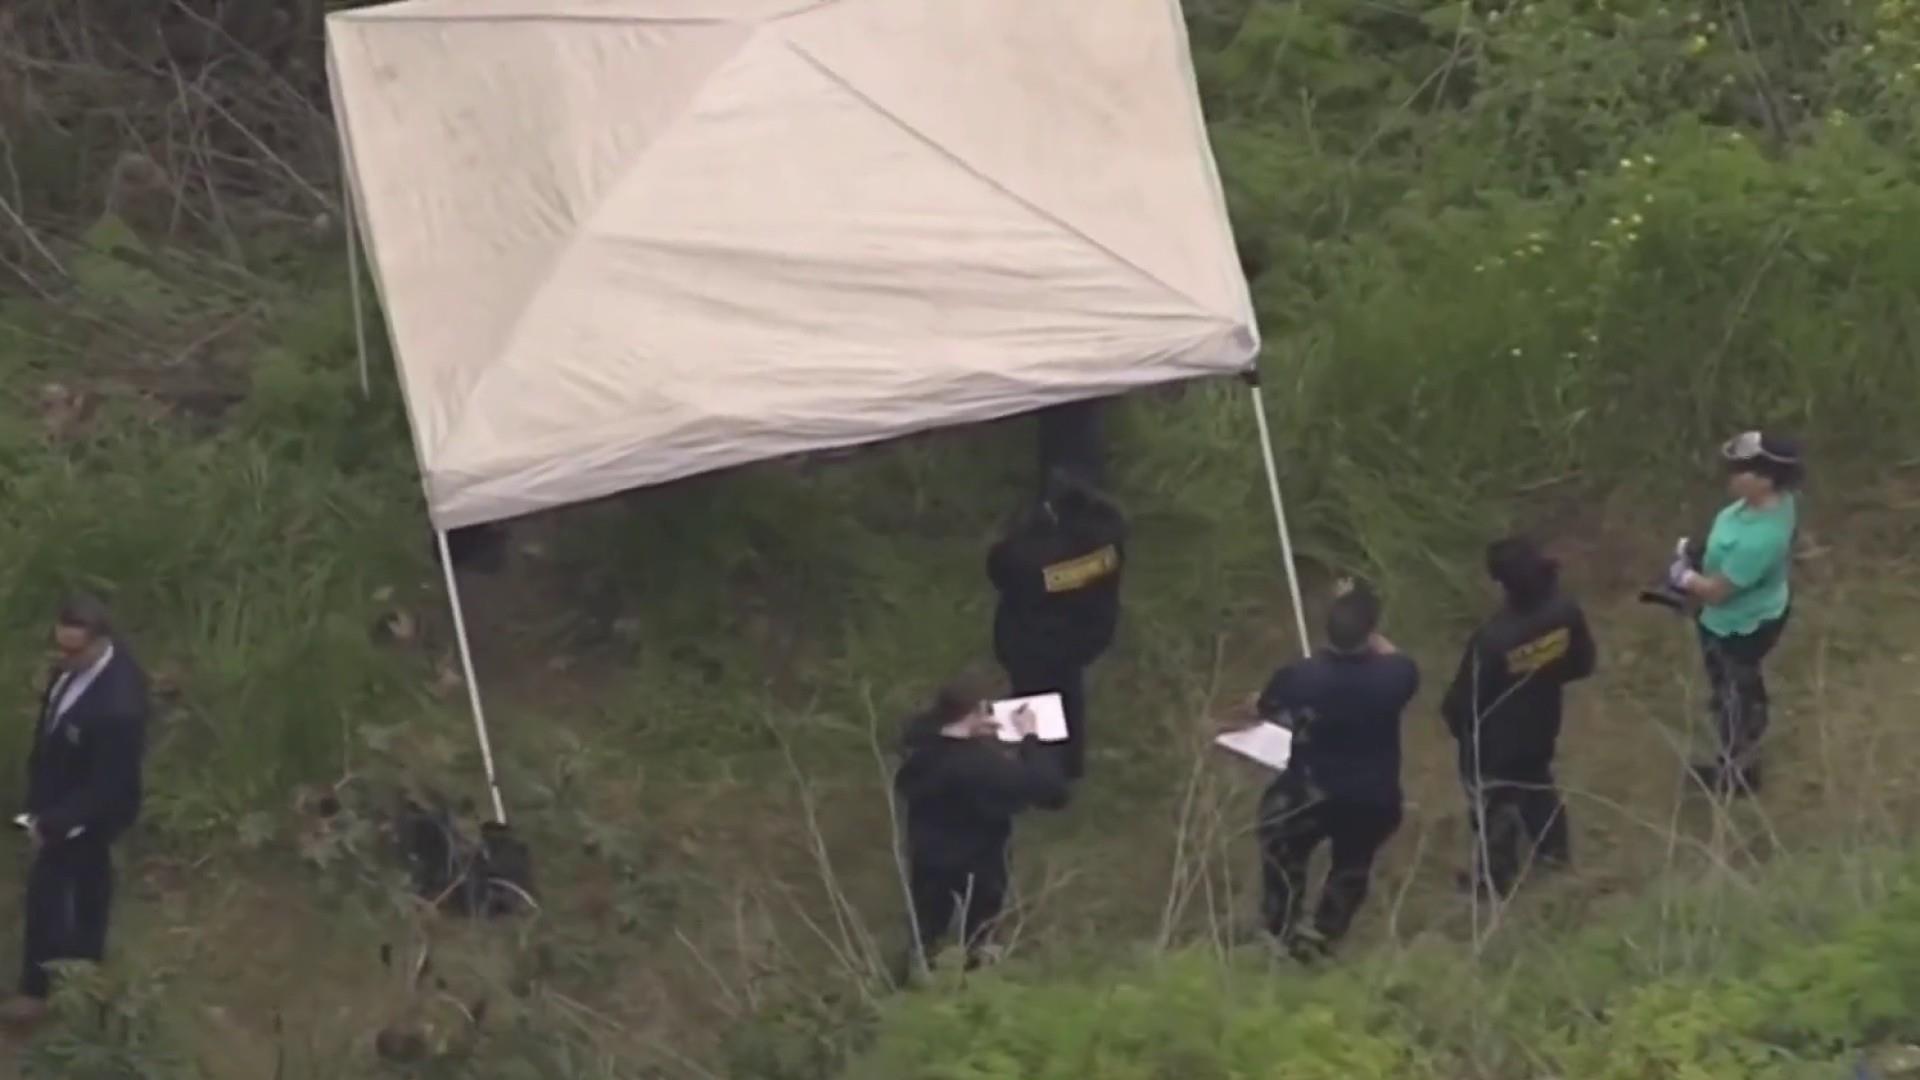 Body of young girl found along LA hiking trail